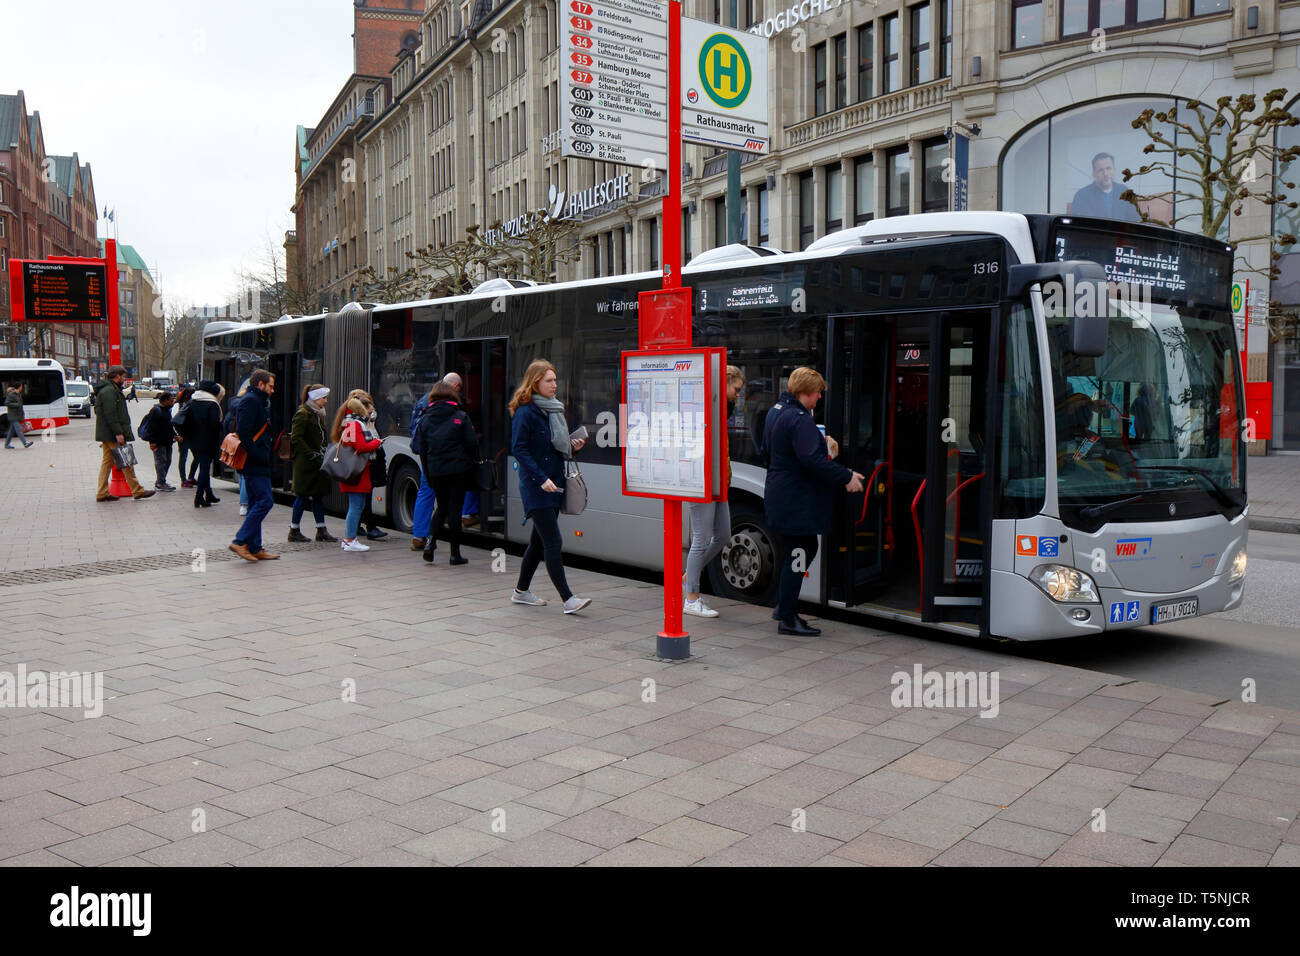 People queuing for a bus outside Rathausmarkt in Hamburg, Germany Stock Photo